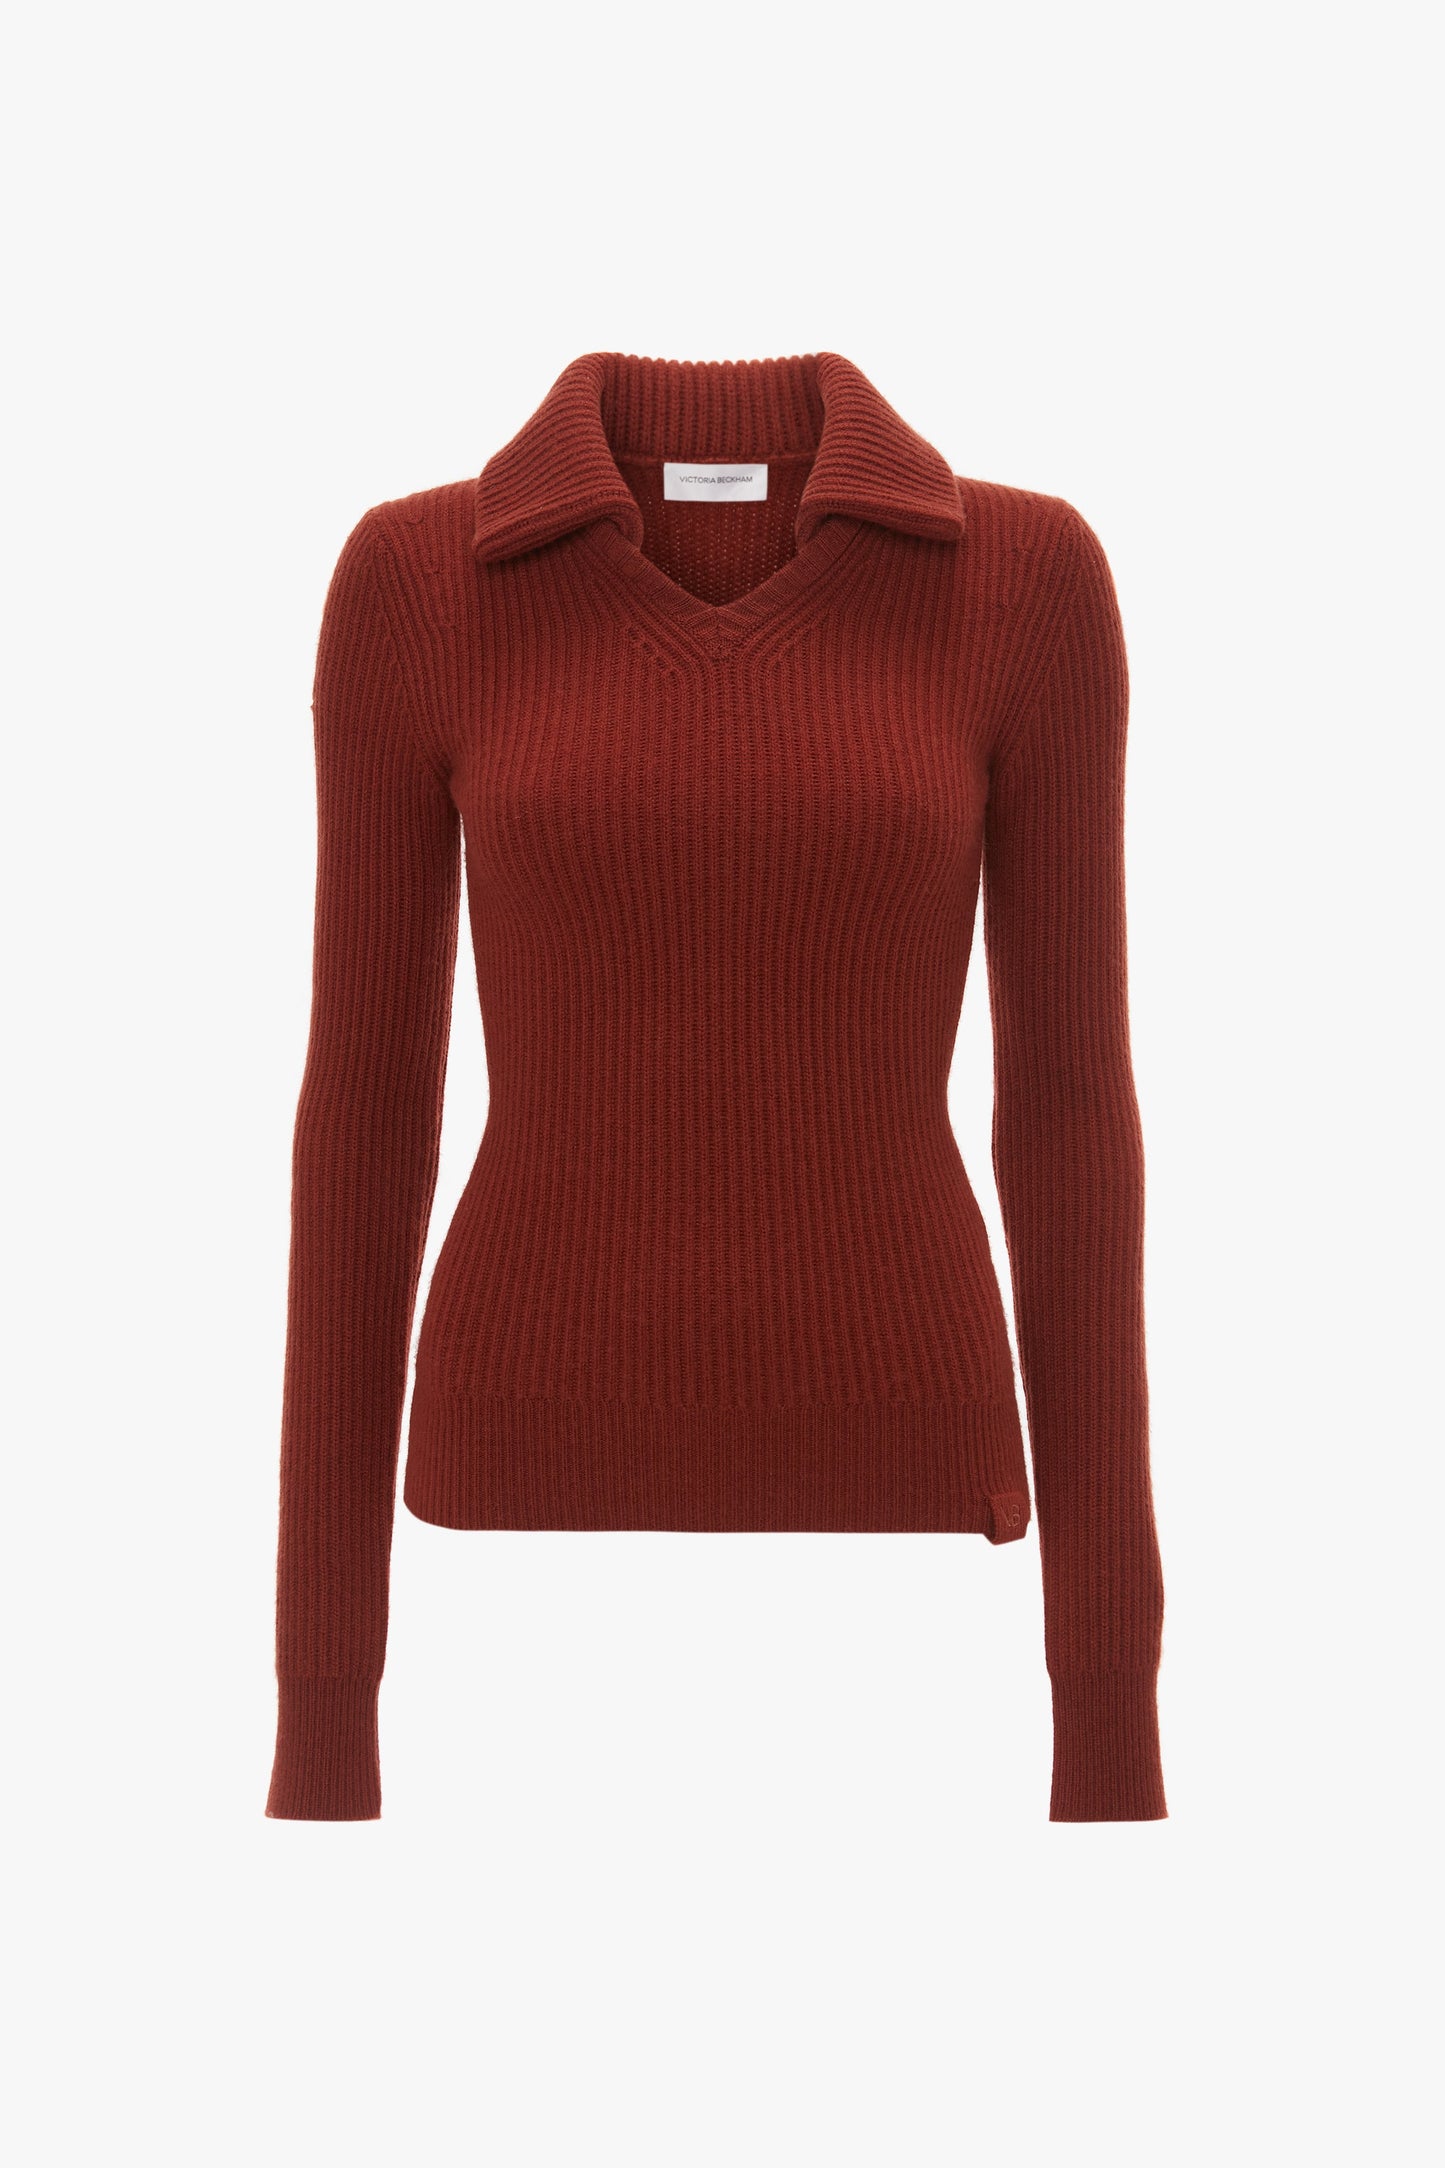 A rust-colored, long-sleeve ribbed sweater with a V-neck and a stylish collared neckline, resembling the elegance of the Double Collared Jumper In Russet by Victoria Beckham.